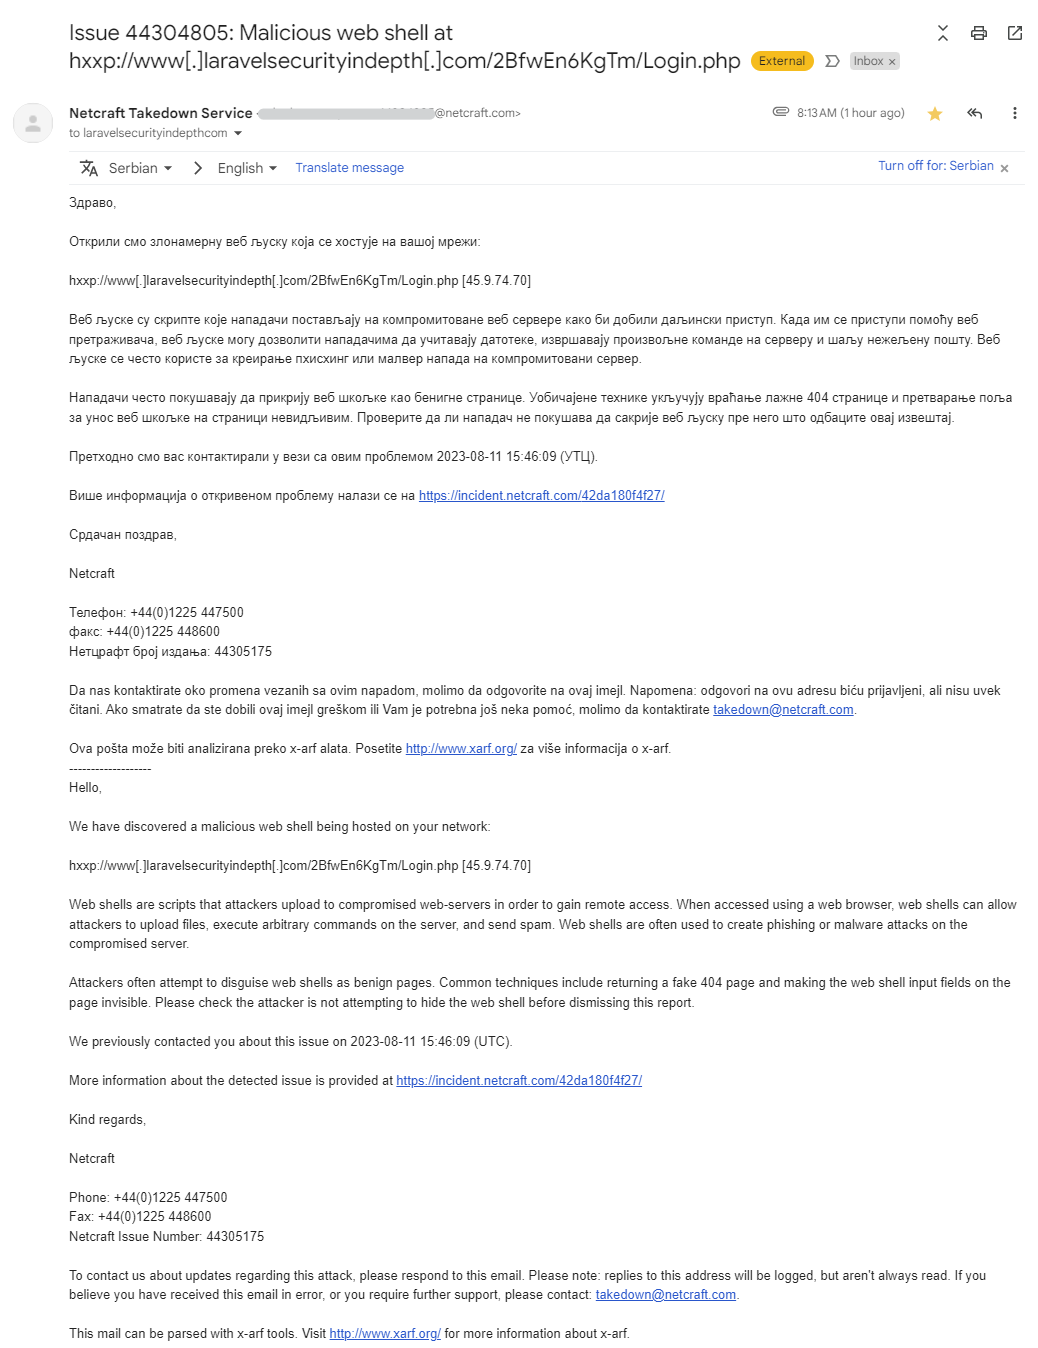 Full email from Netcraft regarding a hijacked domain, the link provided in the following text provides all the details available in the email.